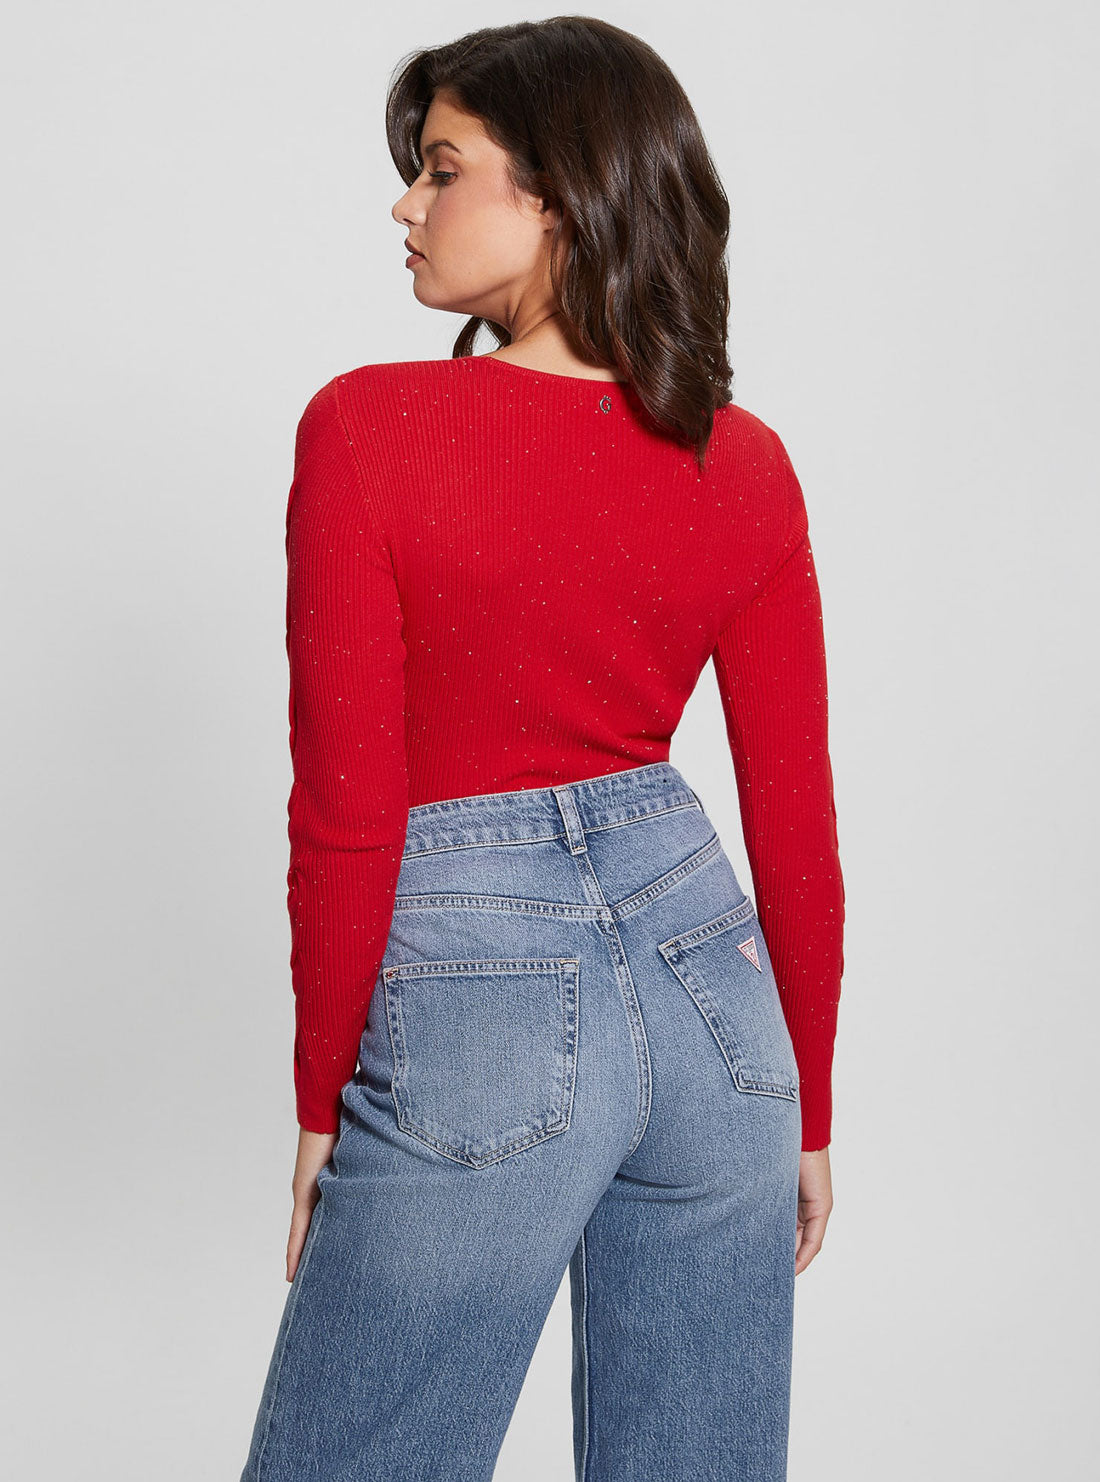 GUESS Red Long Sleeves Laurel Sweater Top back view